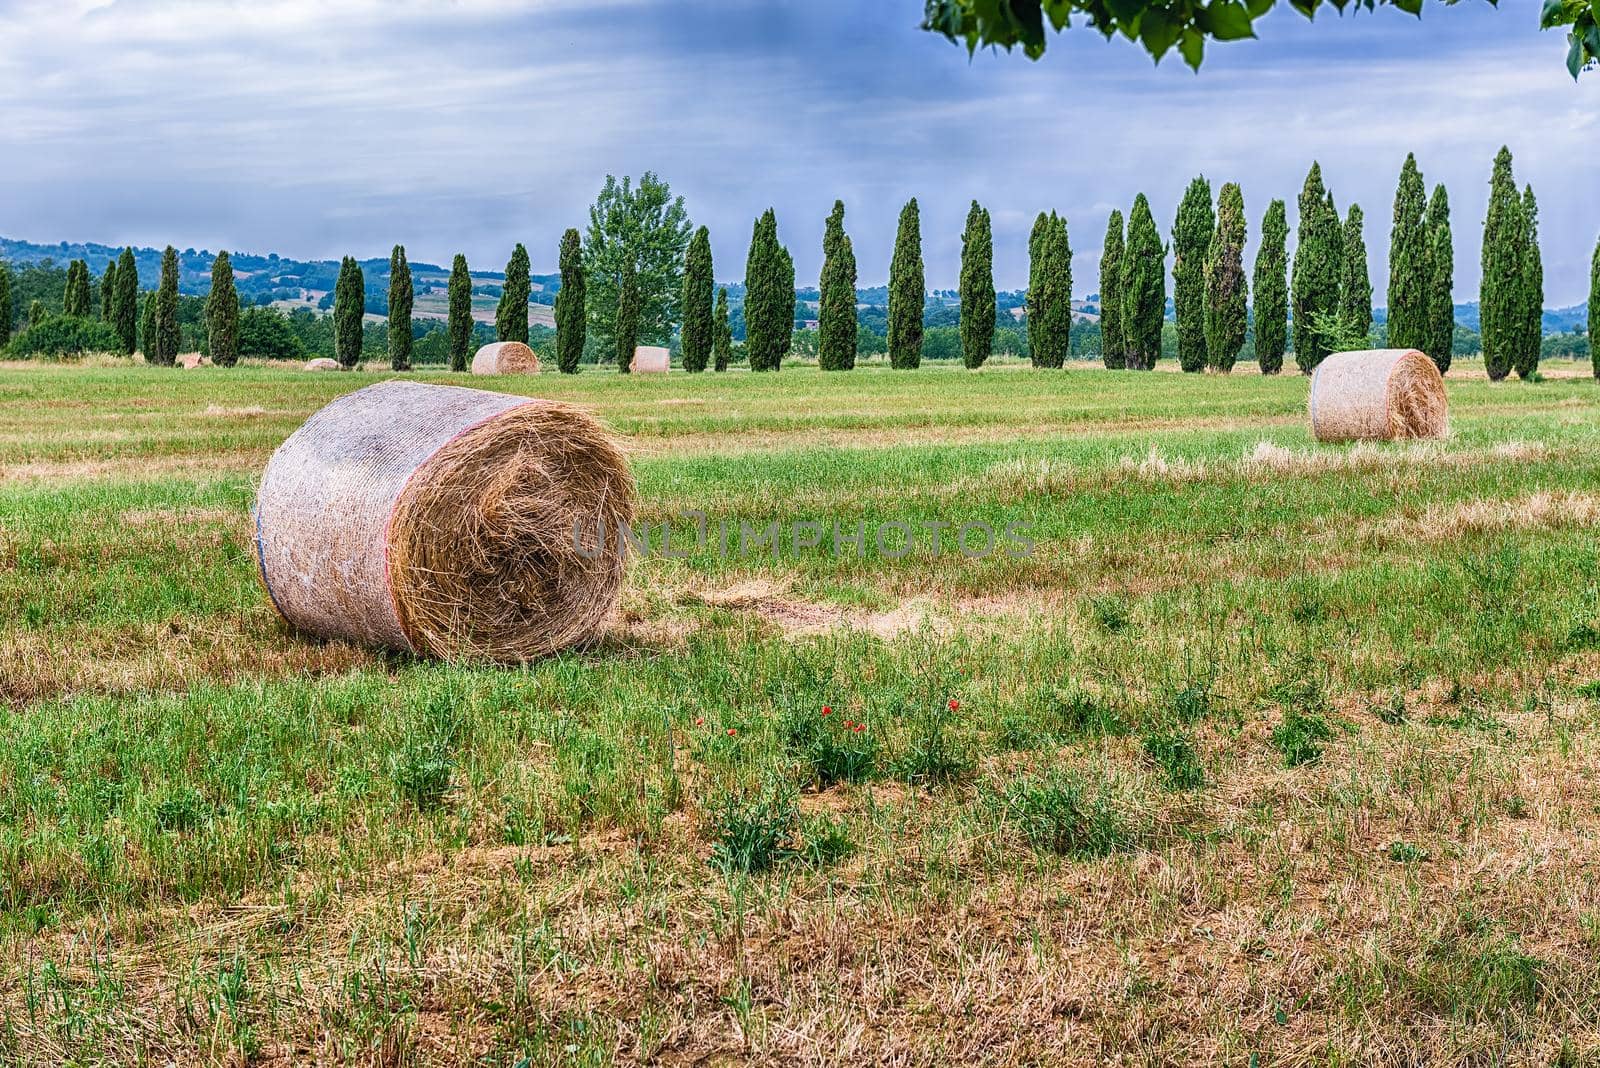 Hay bales on the field after harvest by marcorubino